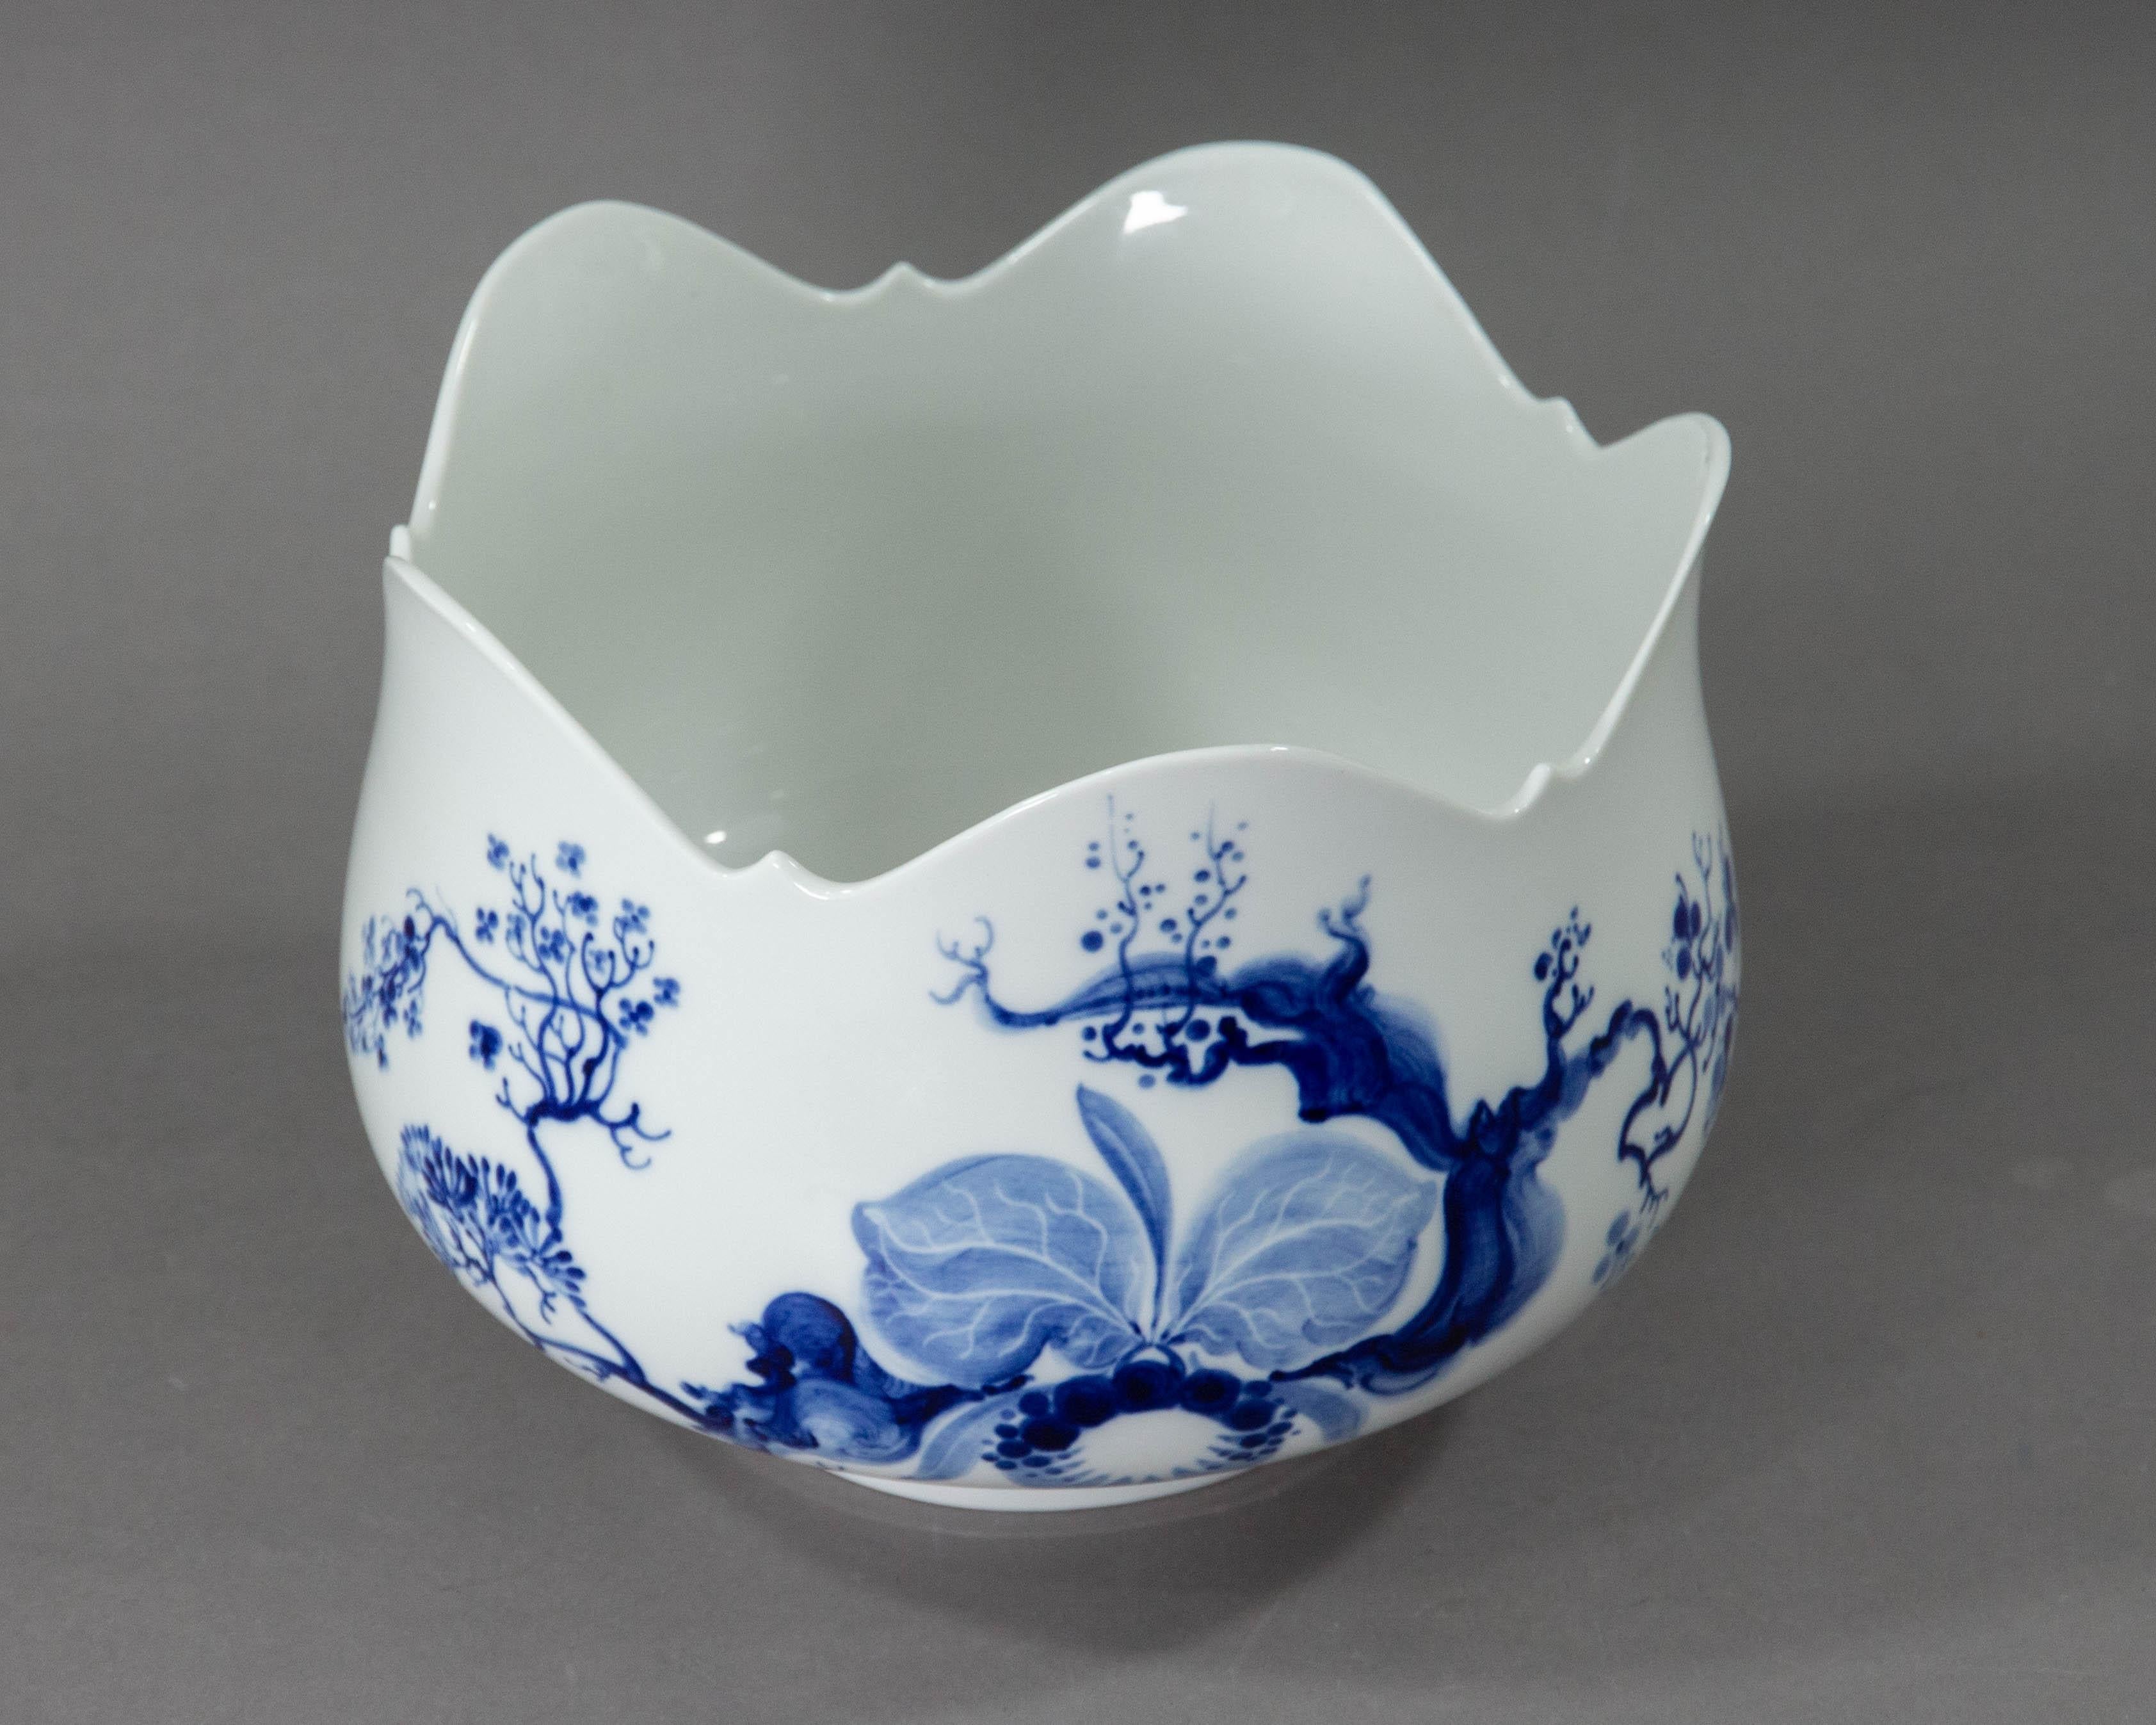 A stunning, rare and large serving bowl made by Meissen made in the second half of the 20th century.

The bowl features Meissen's rare and very sought after 'Blue Orchid' Pattern. The pattern is considered one of the most iconic recent additions